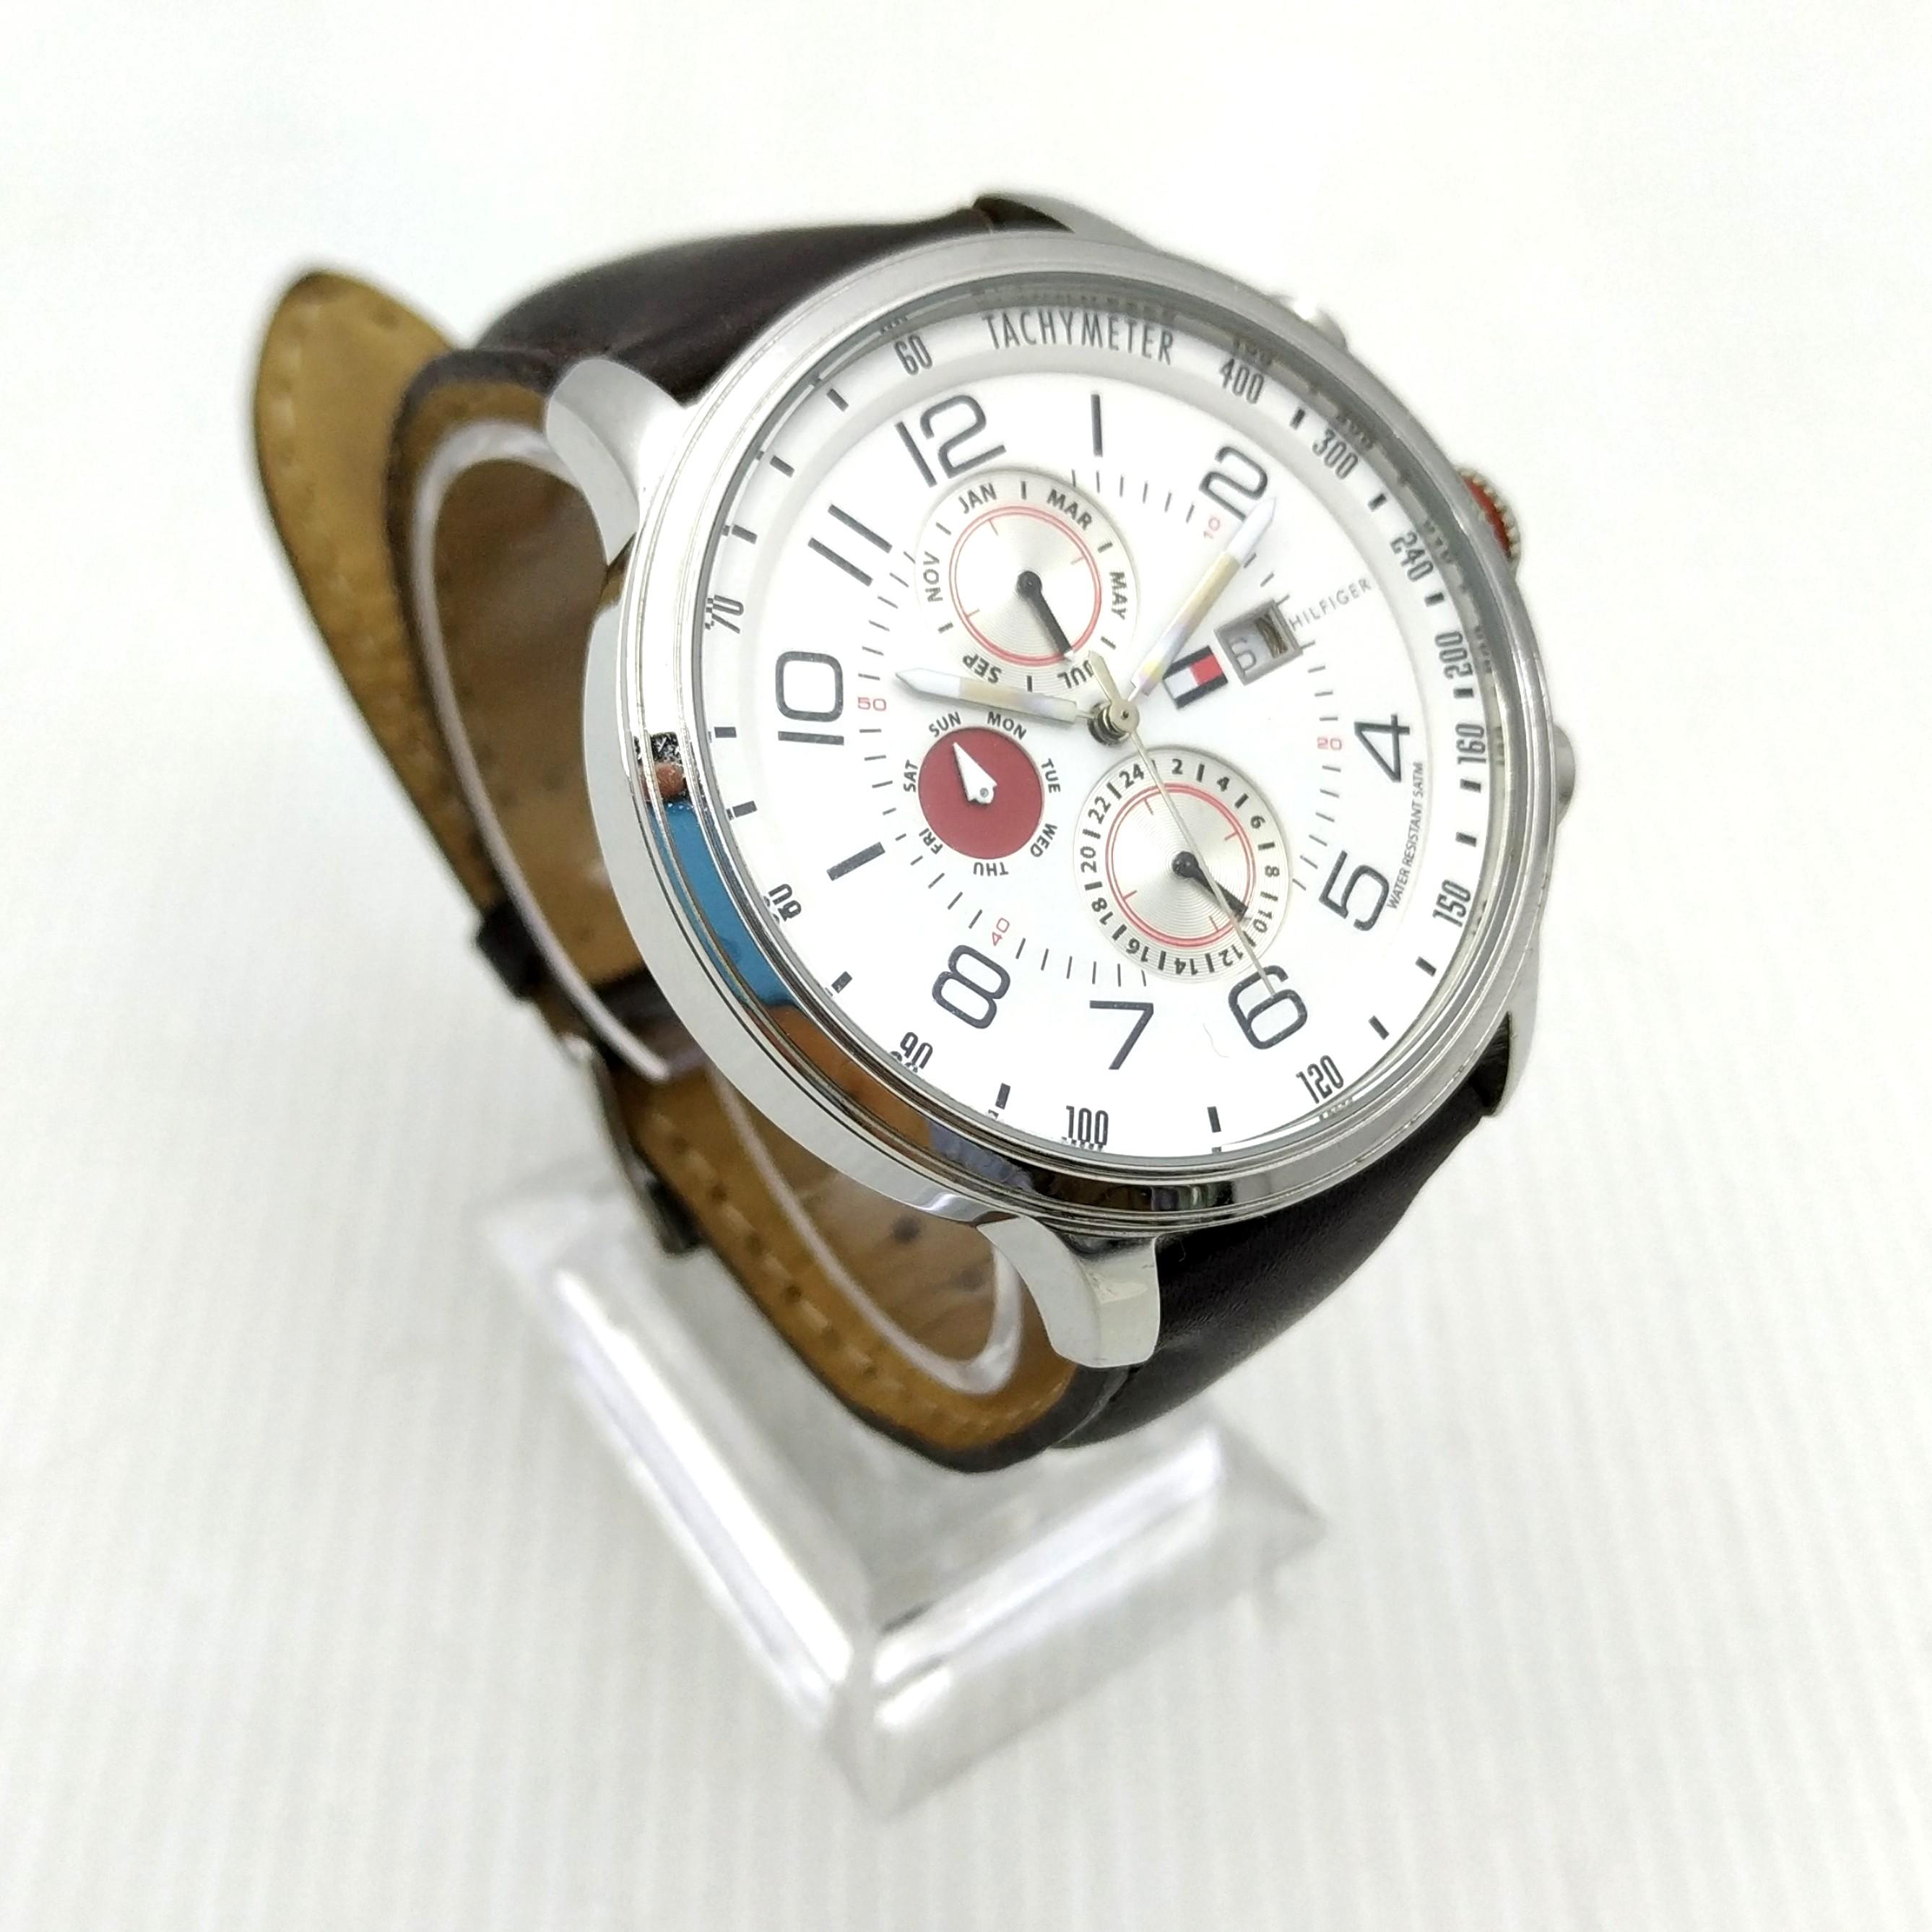 Hilfiger Watch 187002398, Mobile Phones & Gadgets, Wearables & Smart on Carousell